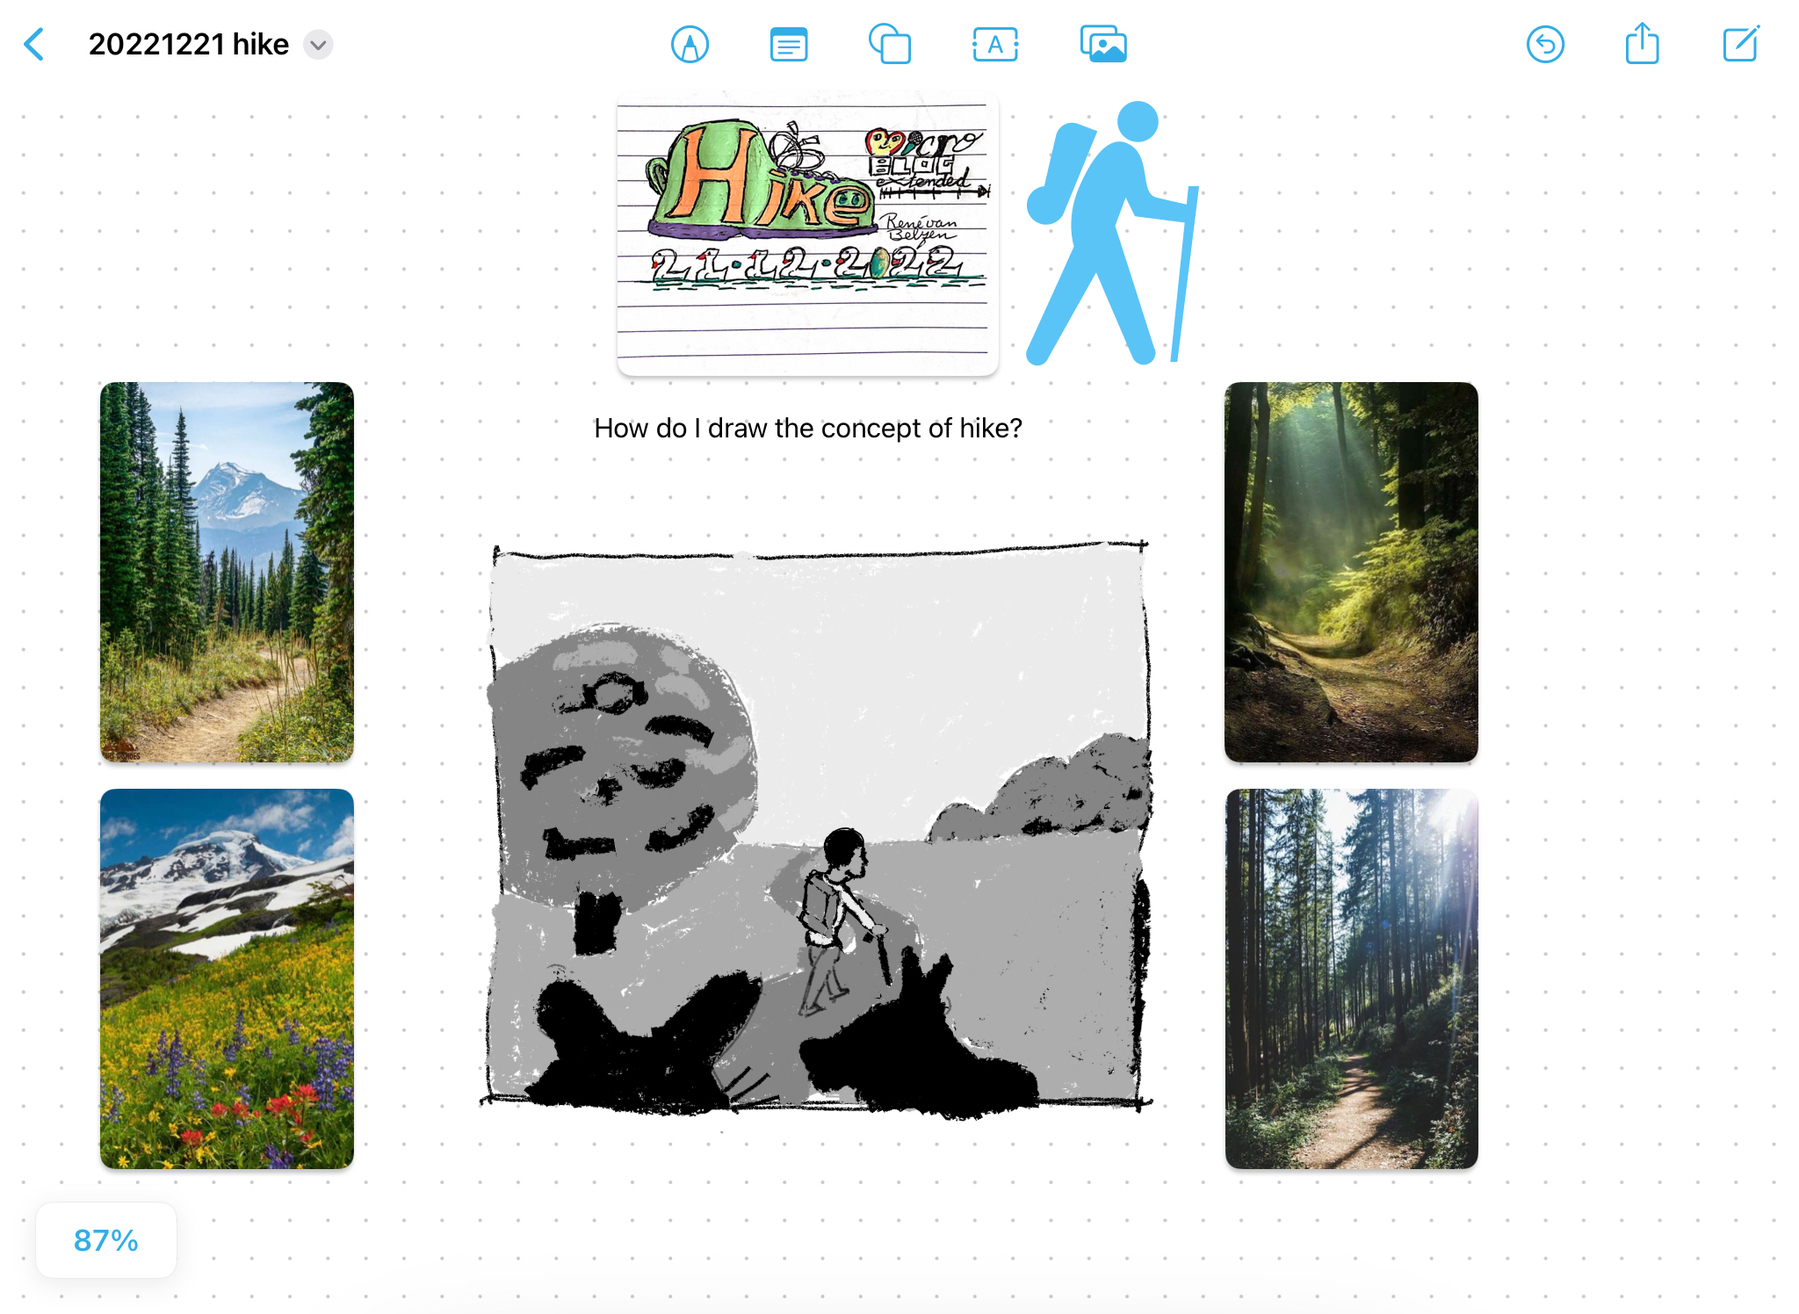 iPad OS 16.2 Freeform app loaded with a concept board for Hike